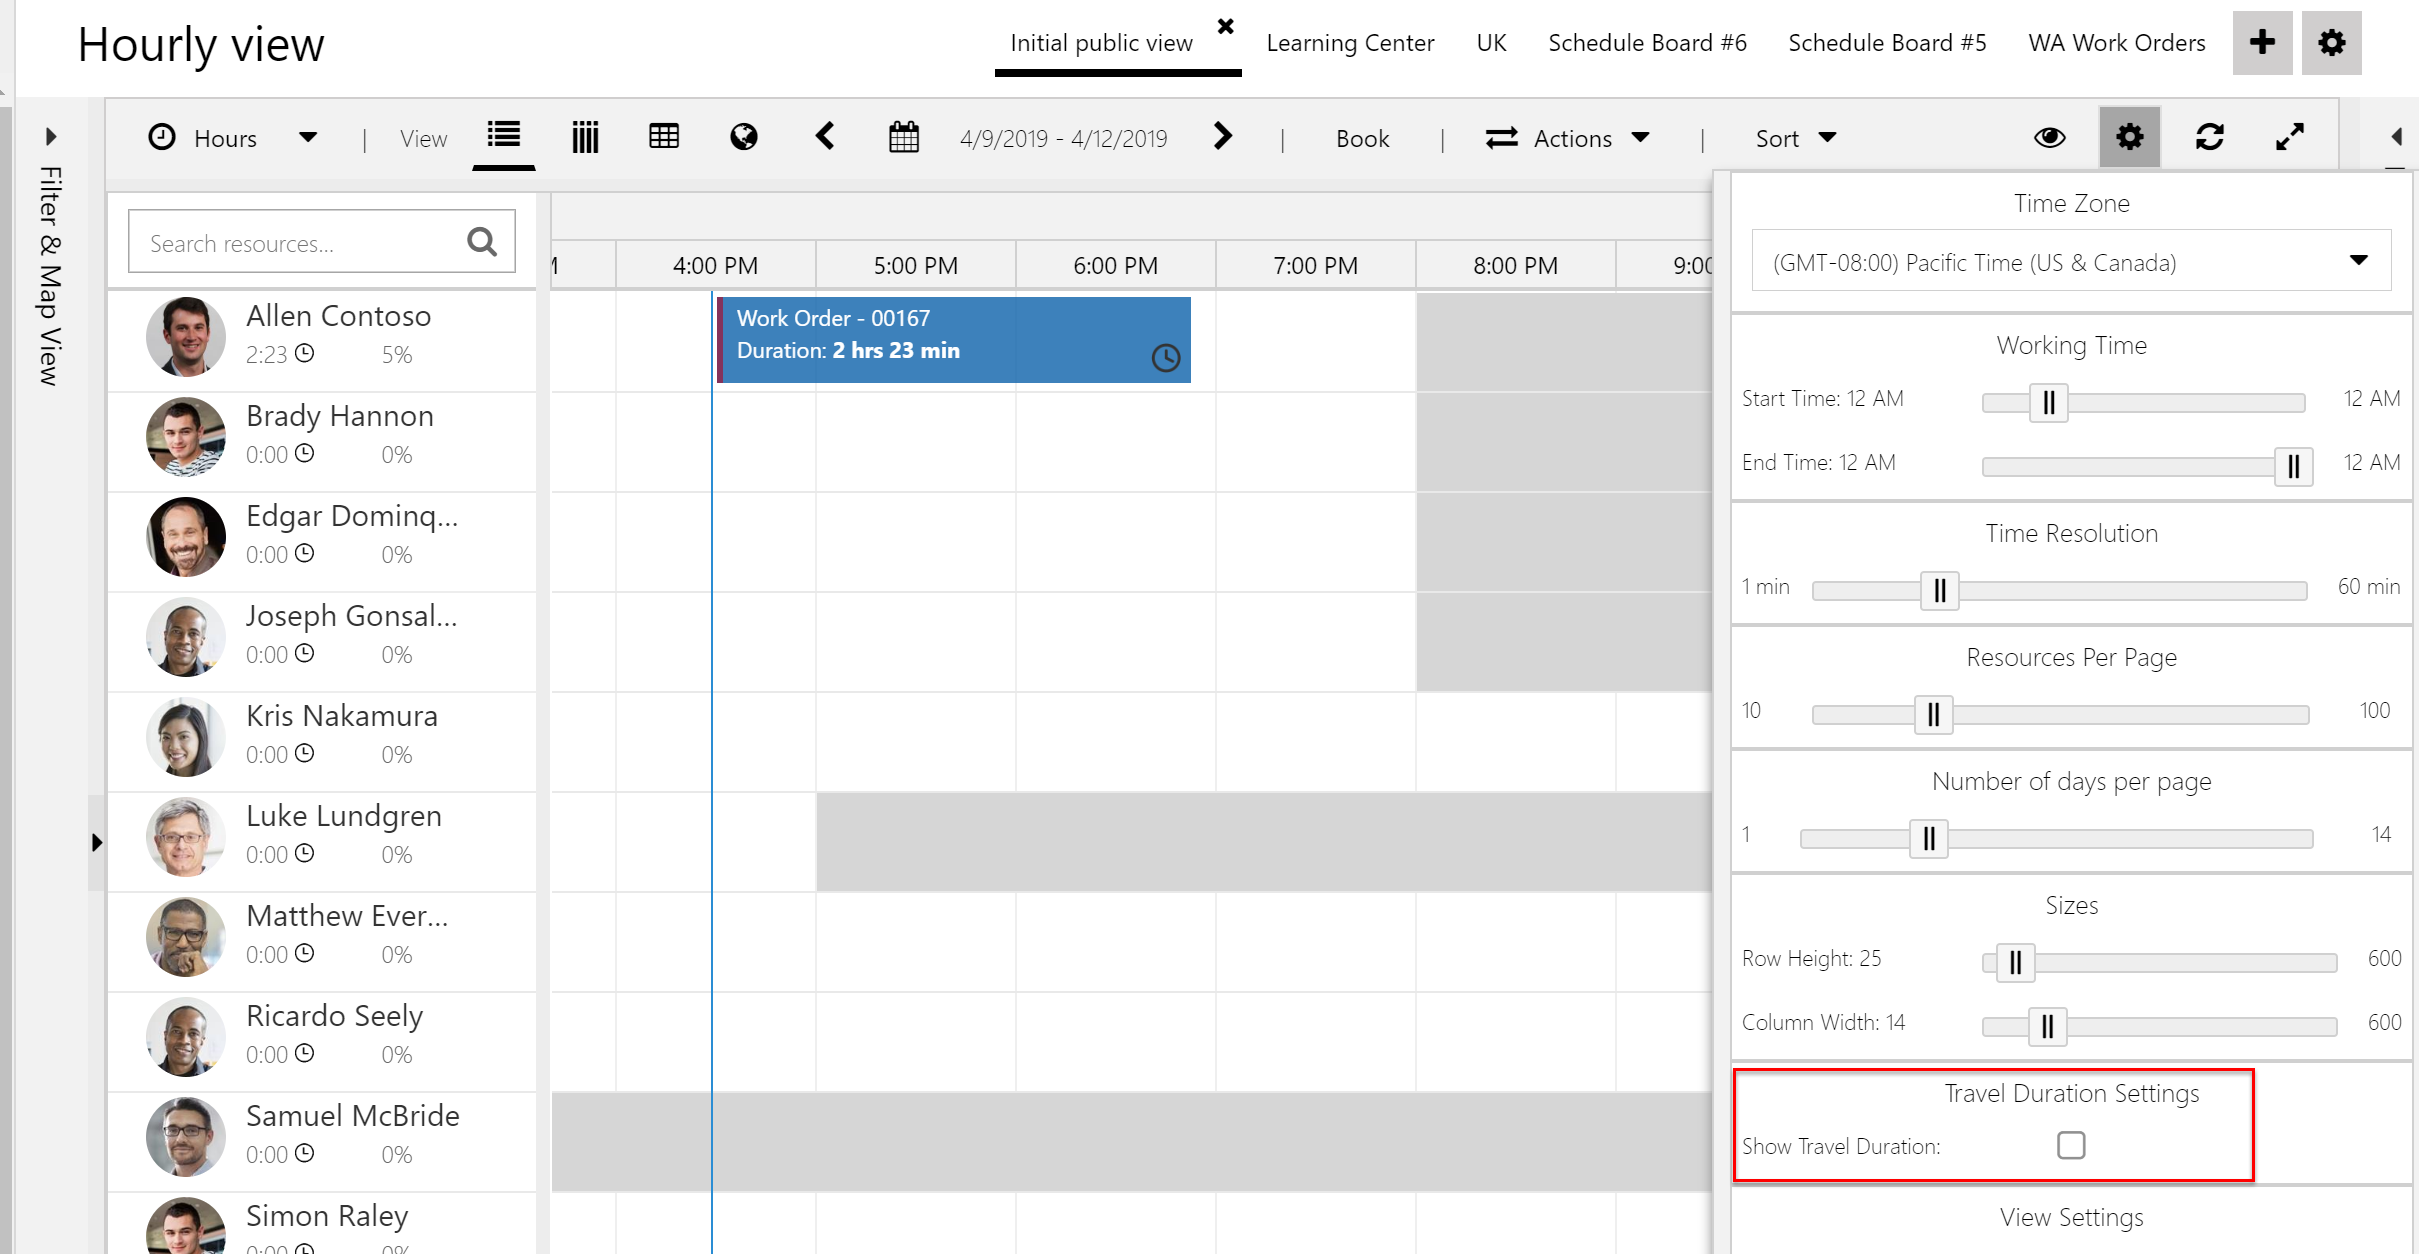 Screenshot of schedule board setting to show or hide travel duration.